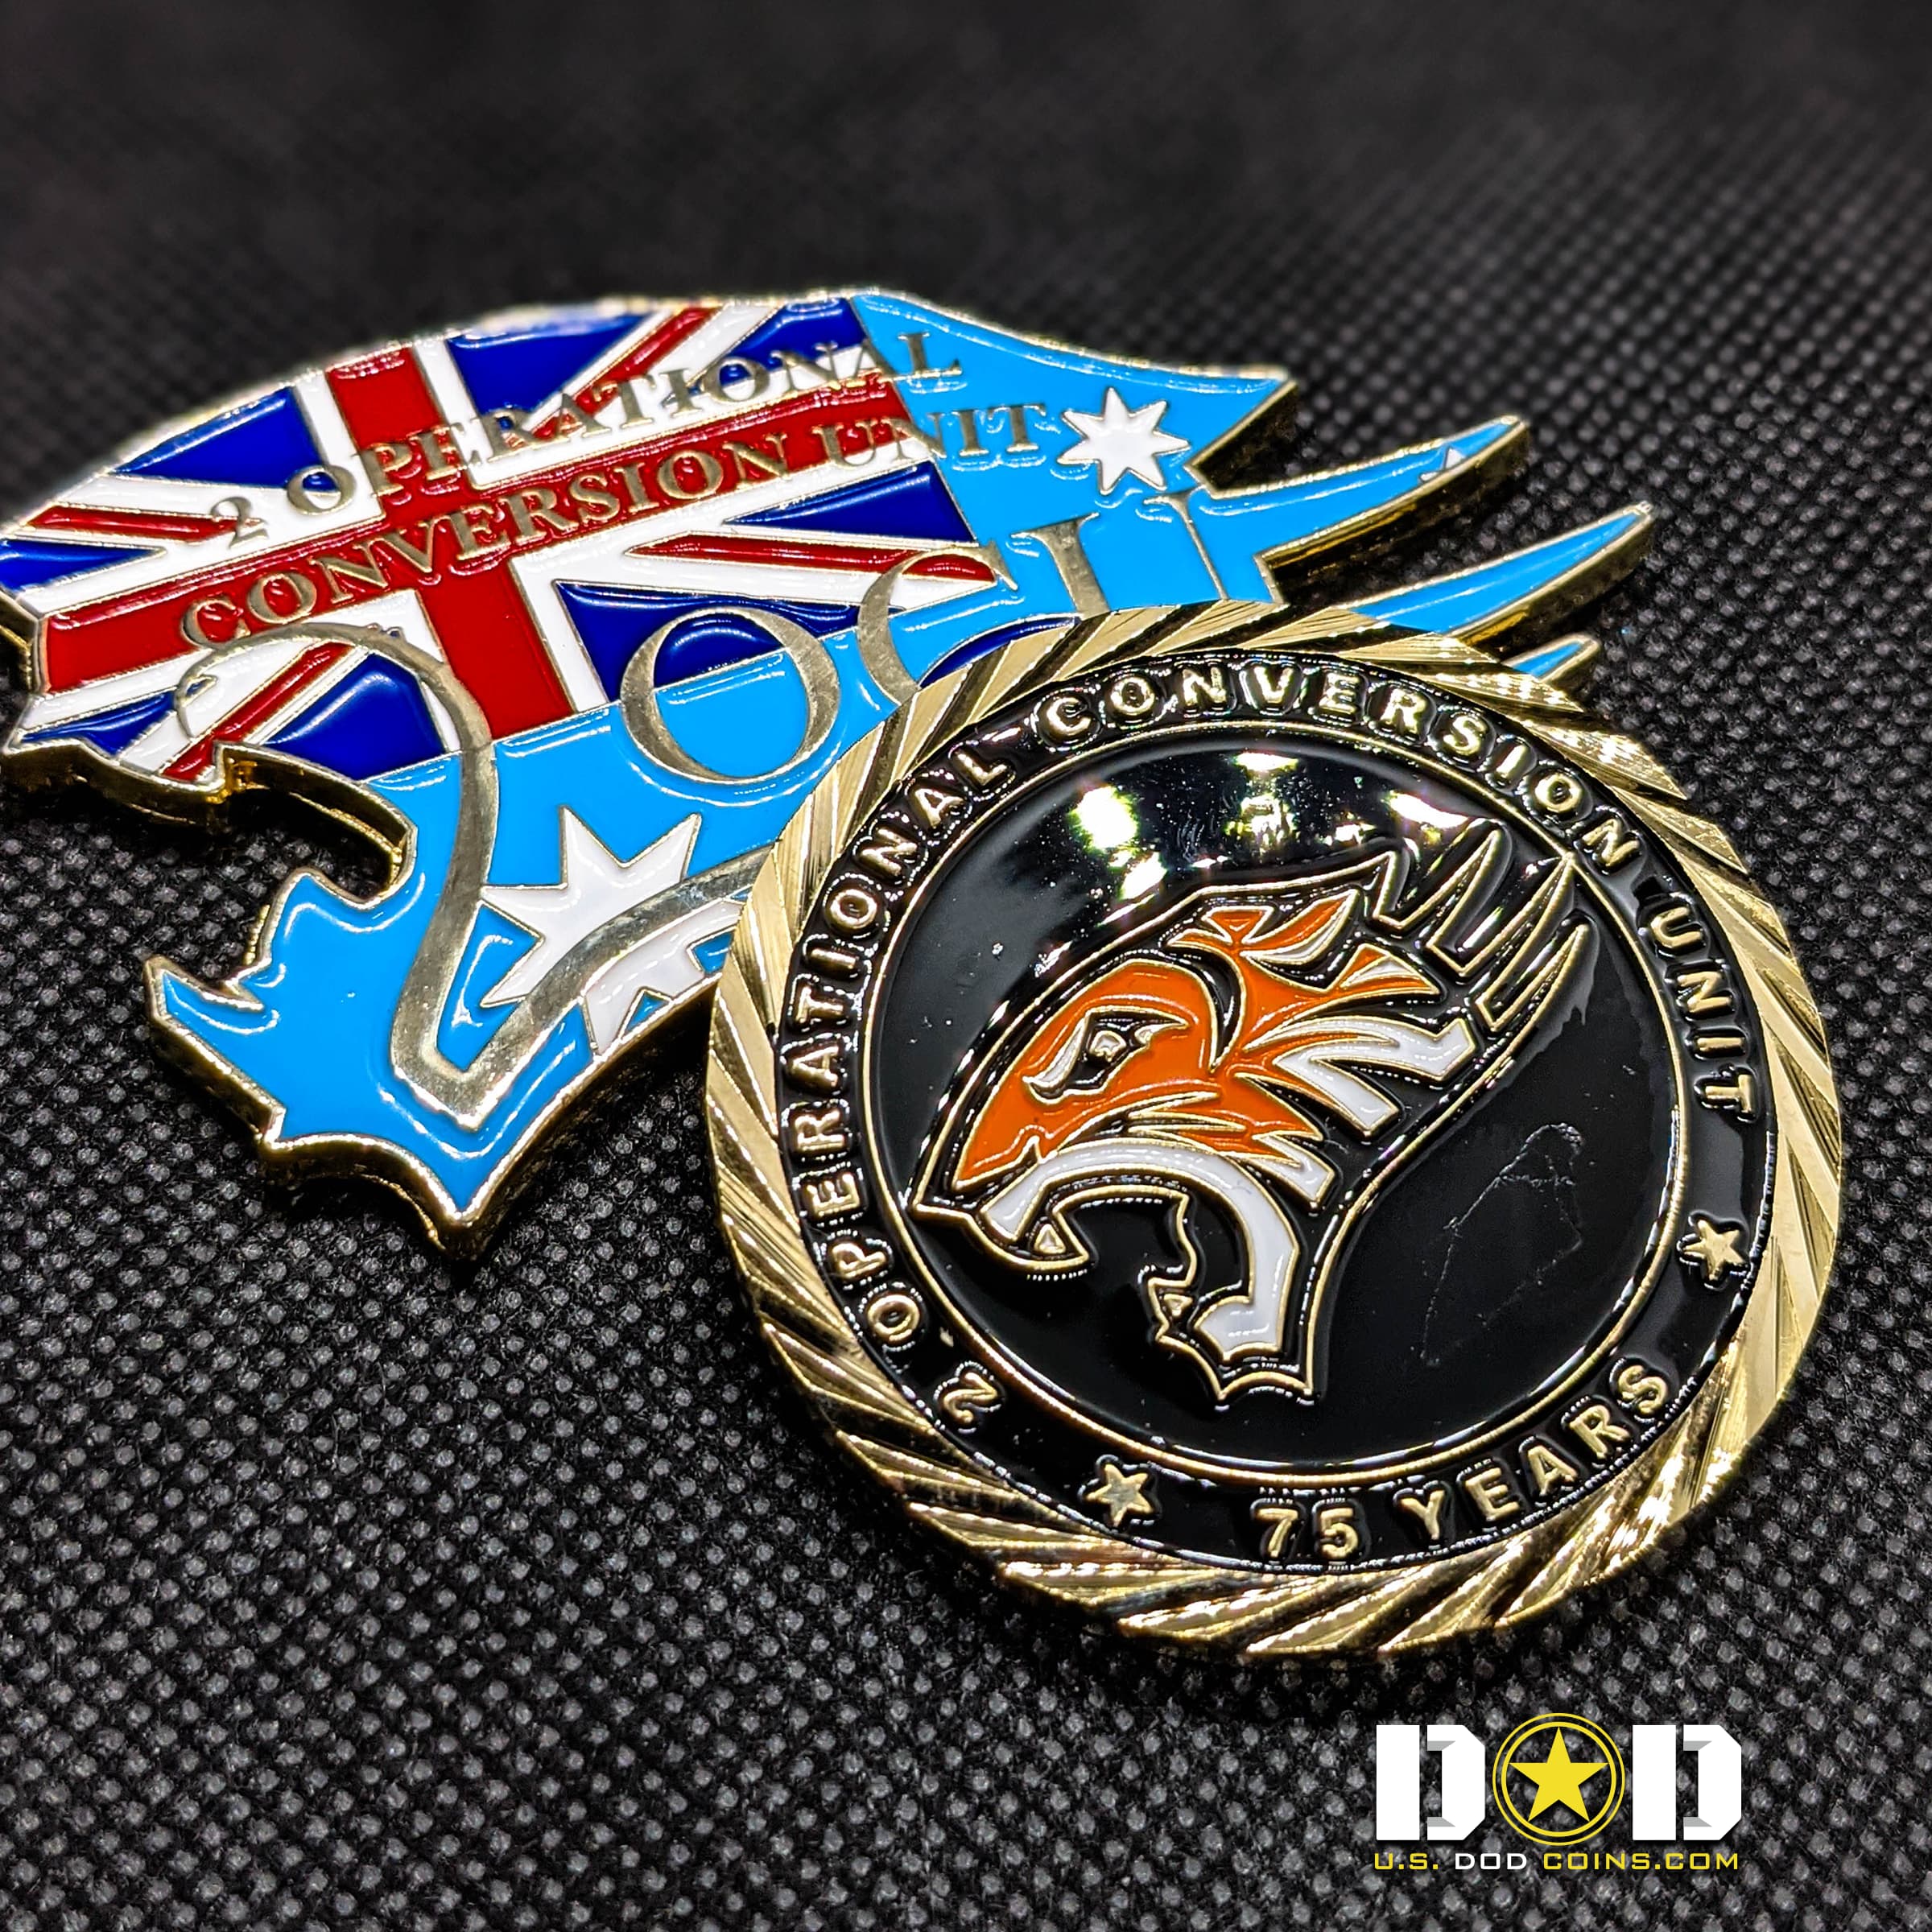 2OCU-Royal-Australian-Air-Force---Tigers-Challenge-Coins_0000_USDODCoins-Challenge-Coins-Examples-70